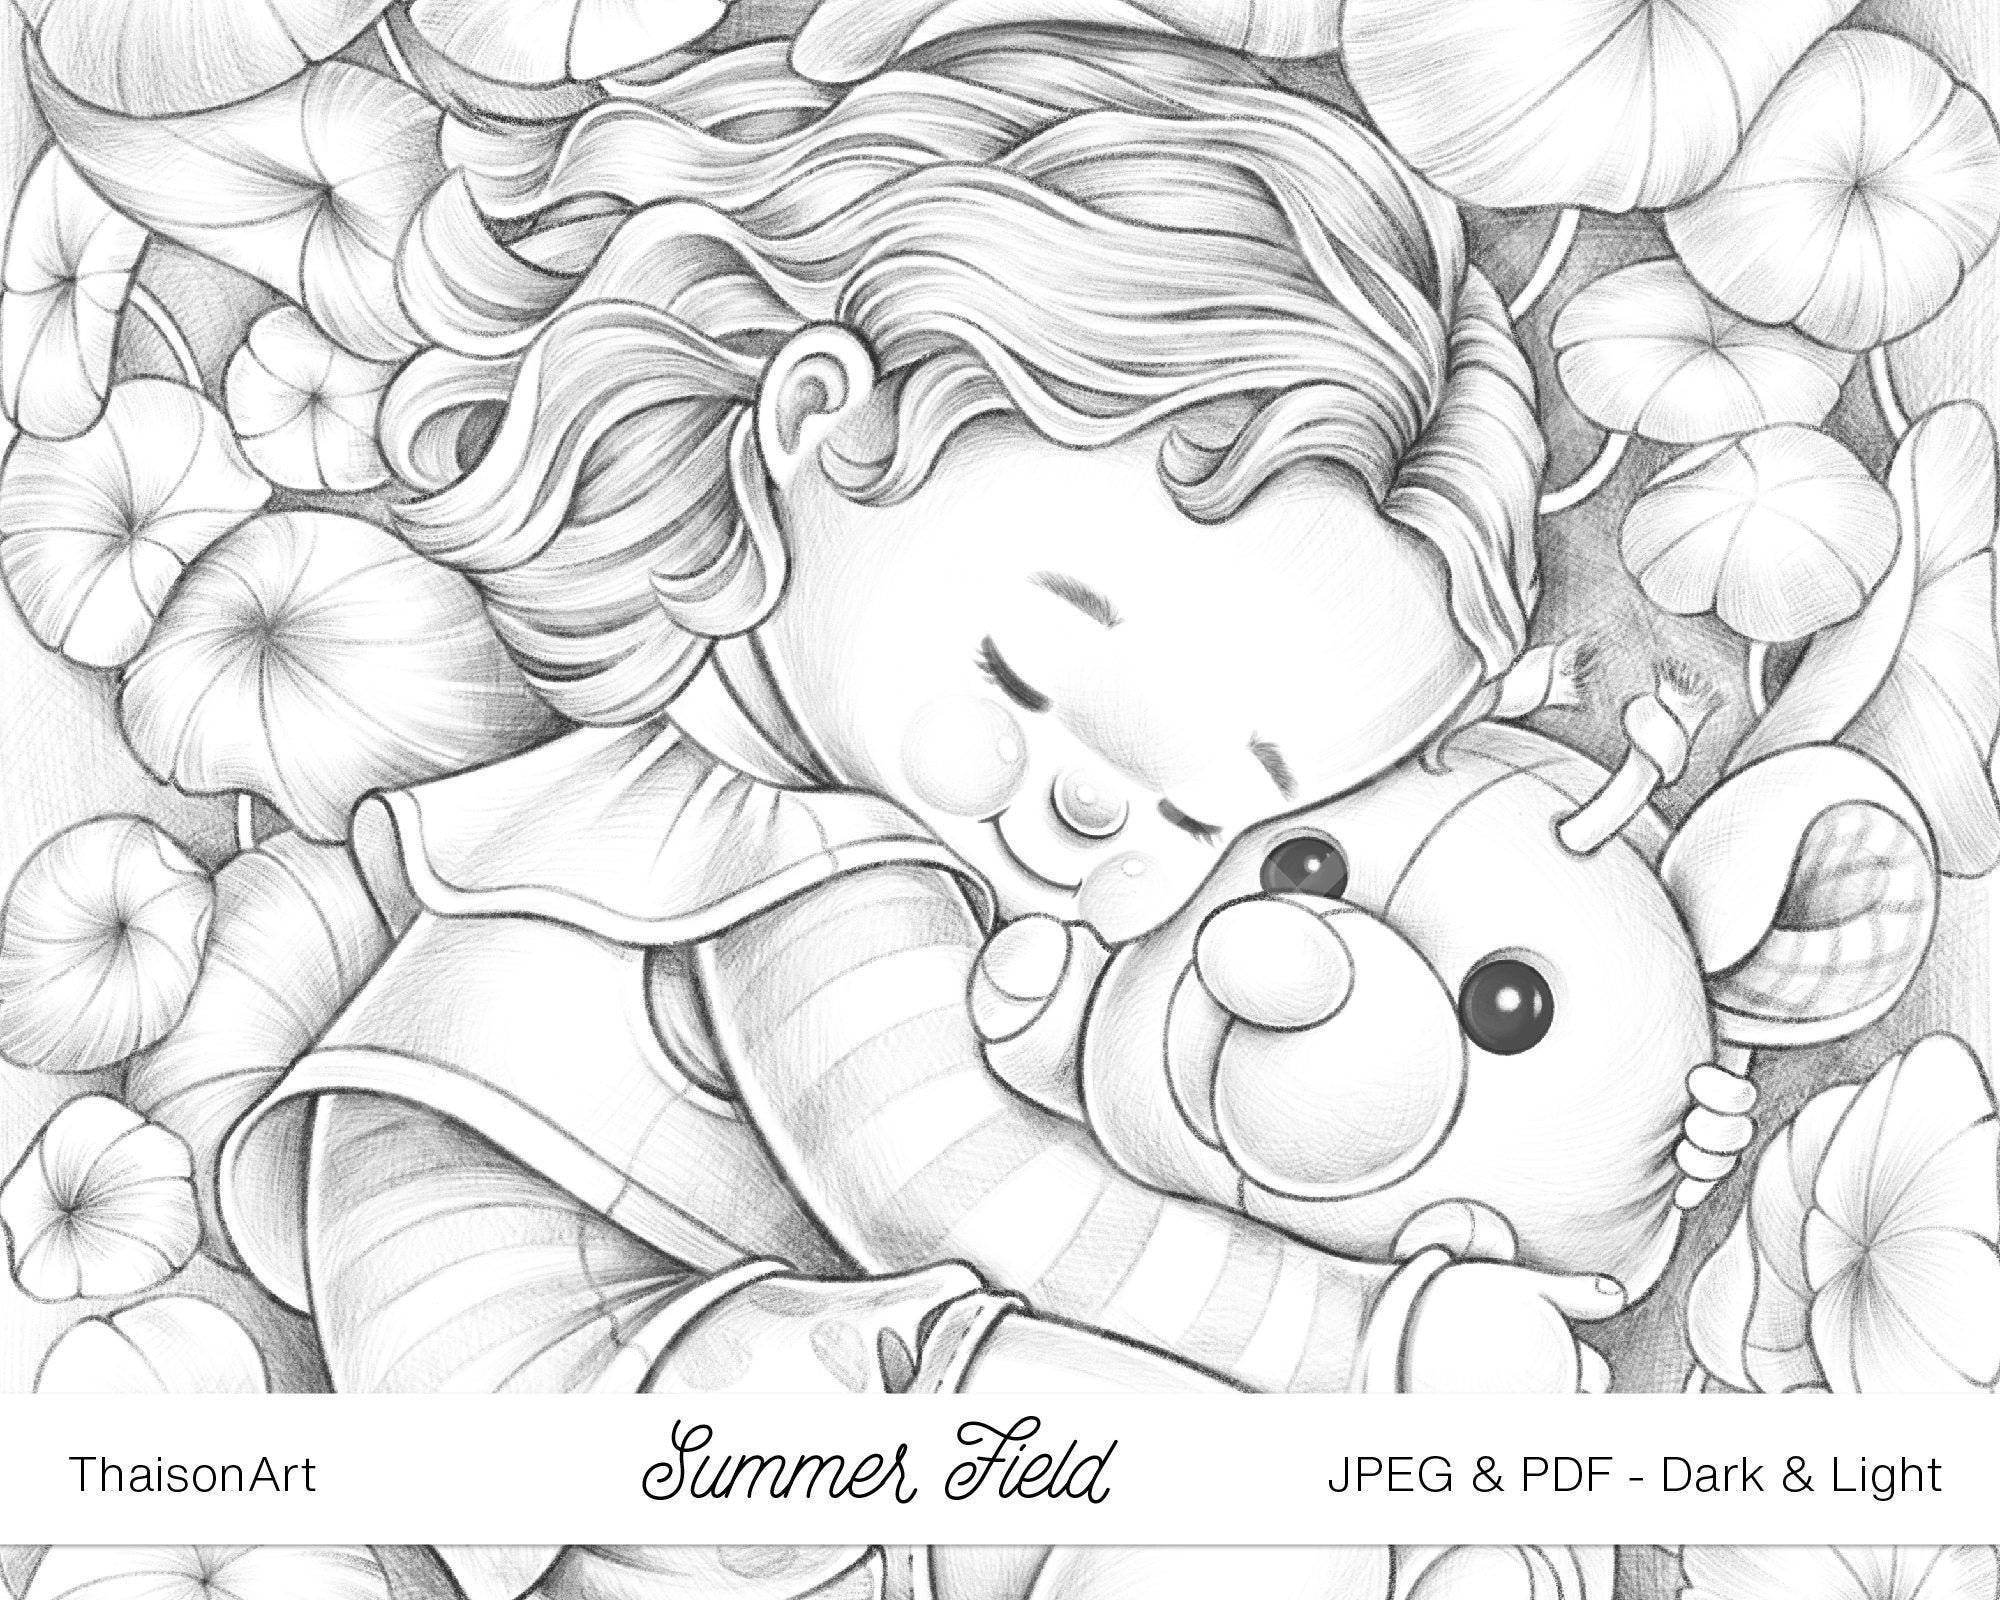 Summer field kids coloring page printable adult coloring page downloadable pdf girl love scenery coloring book page illustration stamp download now